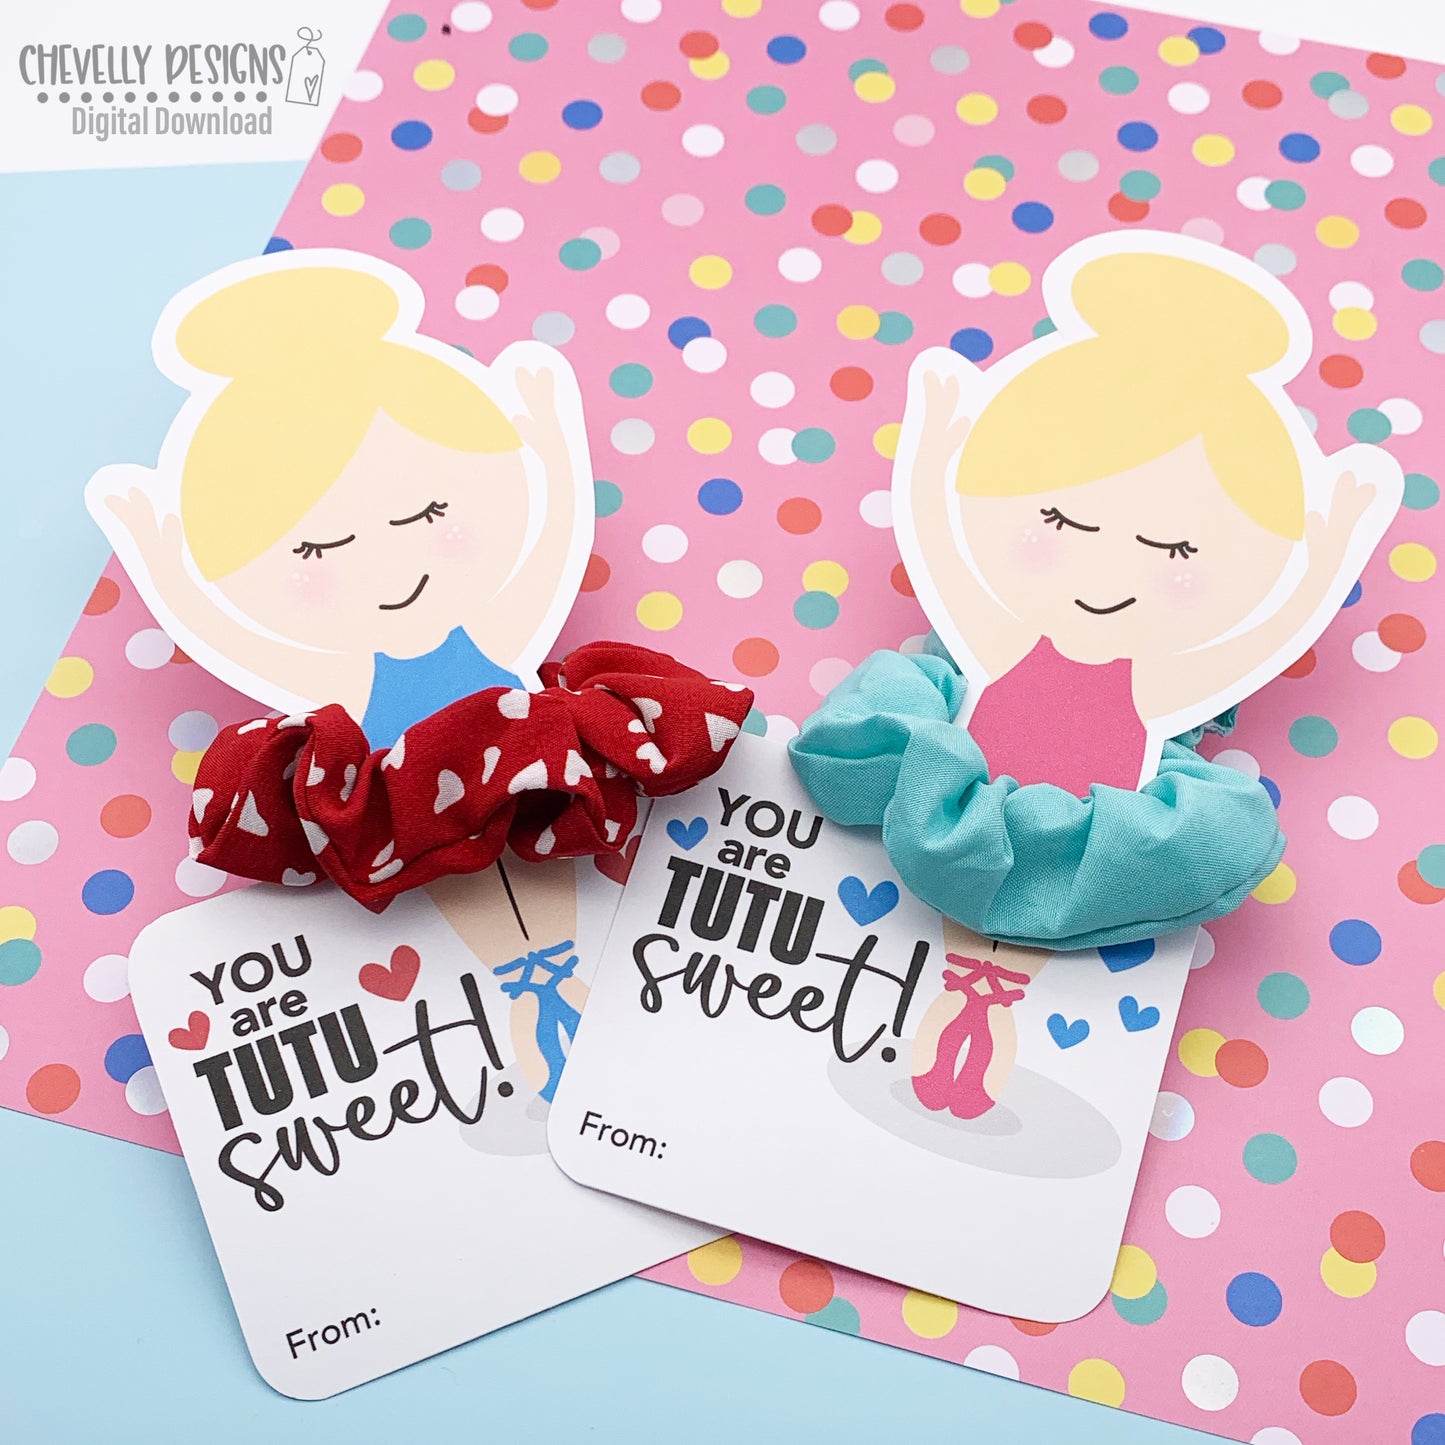 Printable Ballet Scrunchie Cards - Dancing With You is Tutu Fun - Blonde Haired Ballerina